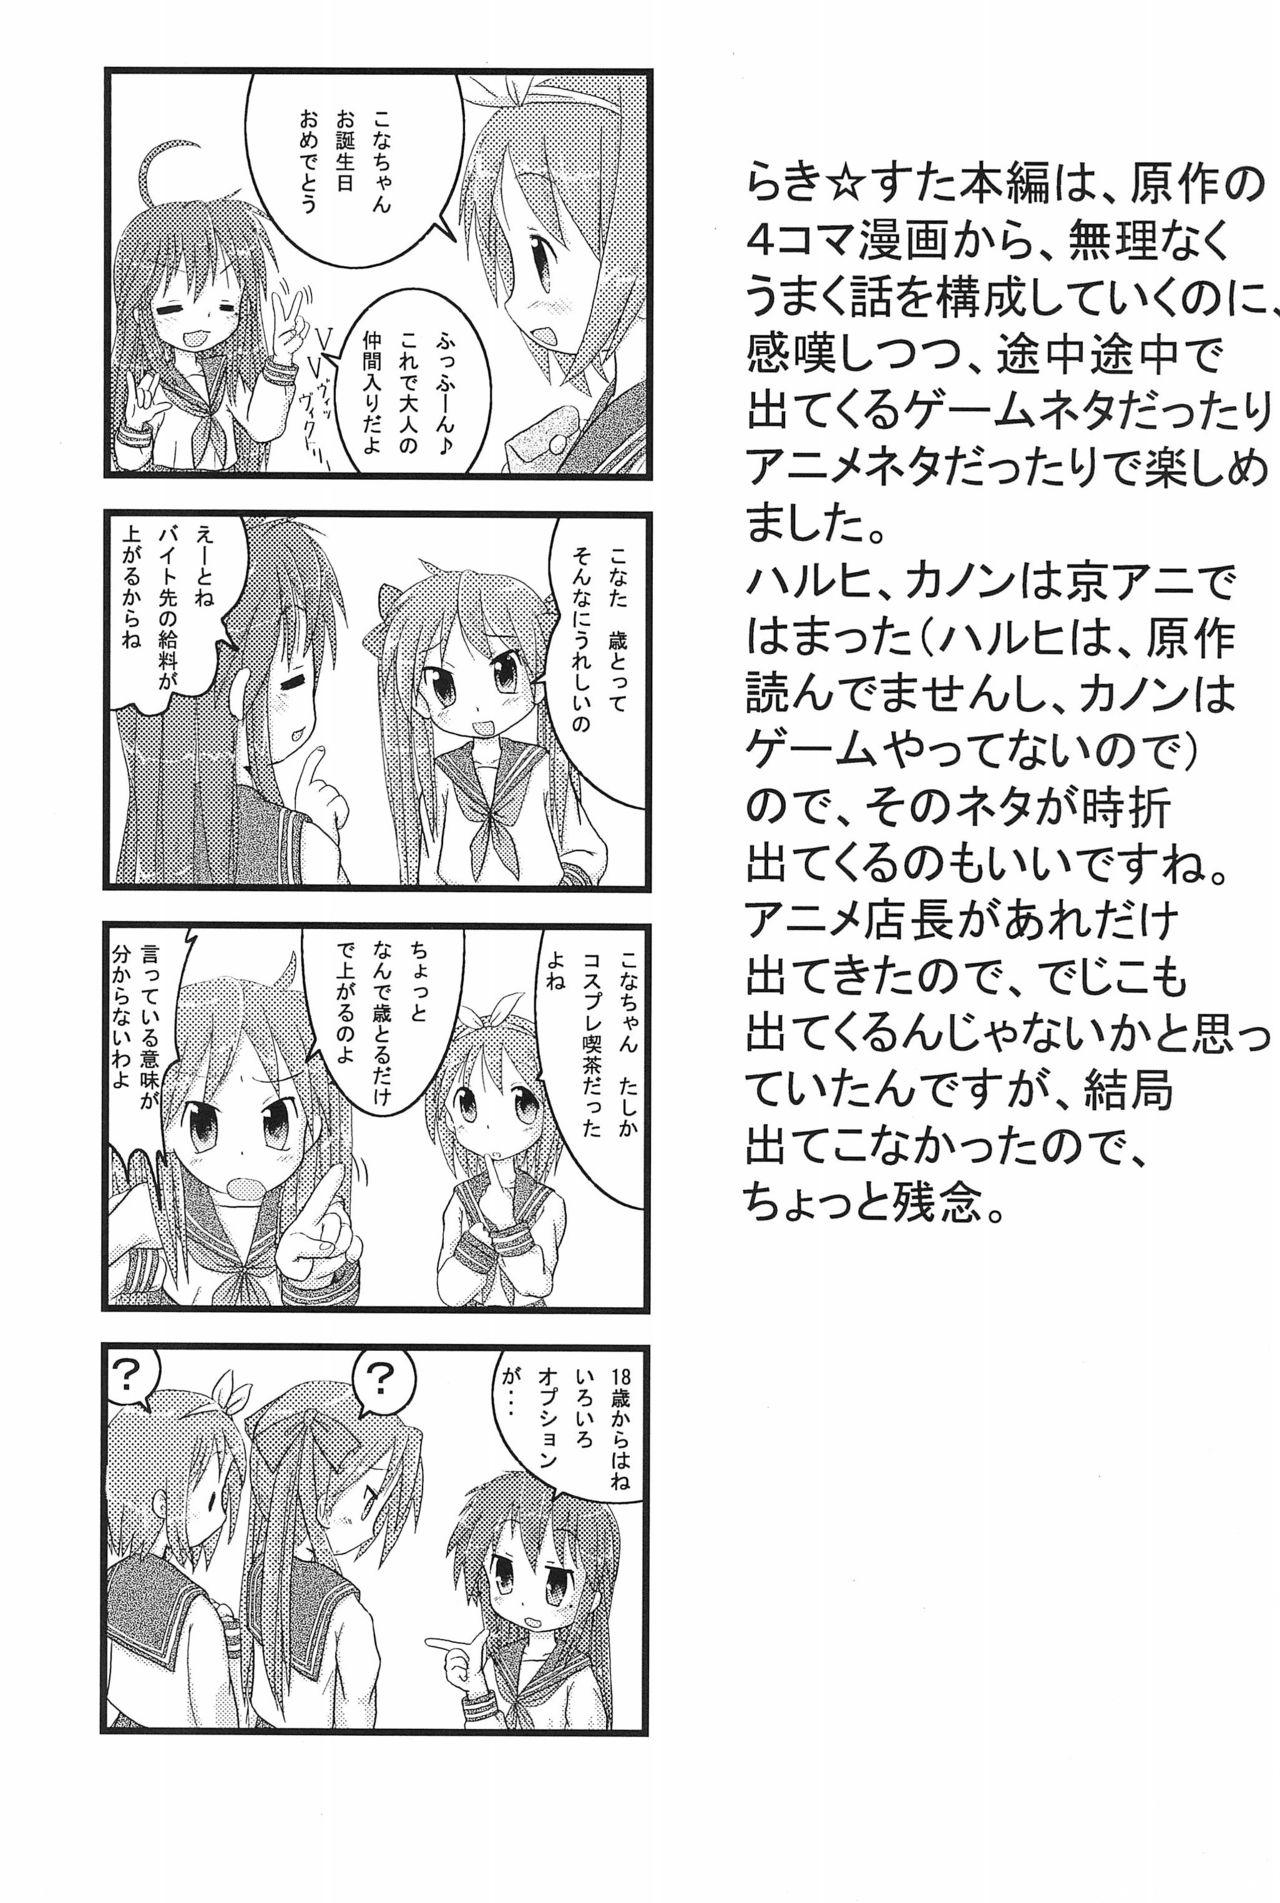 Hotwife Mix Ribbon 16 - Lucky star Ichigo mashimaro Old And Young - Page 5